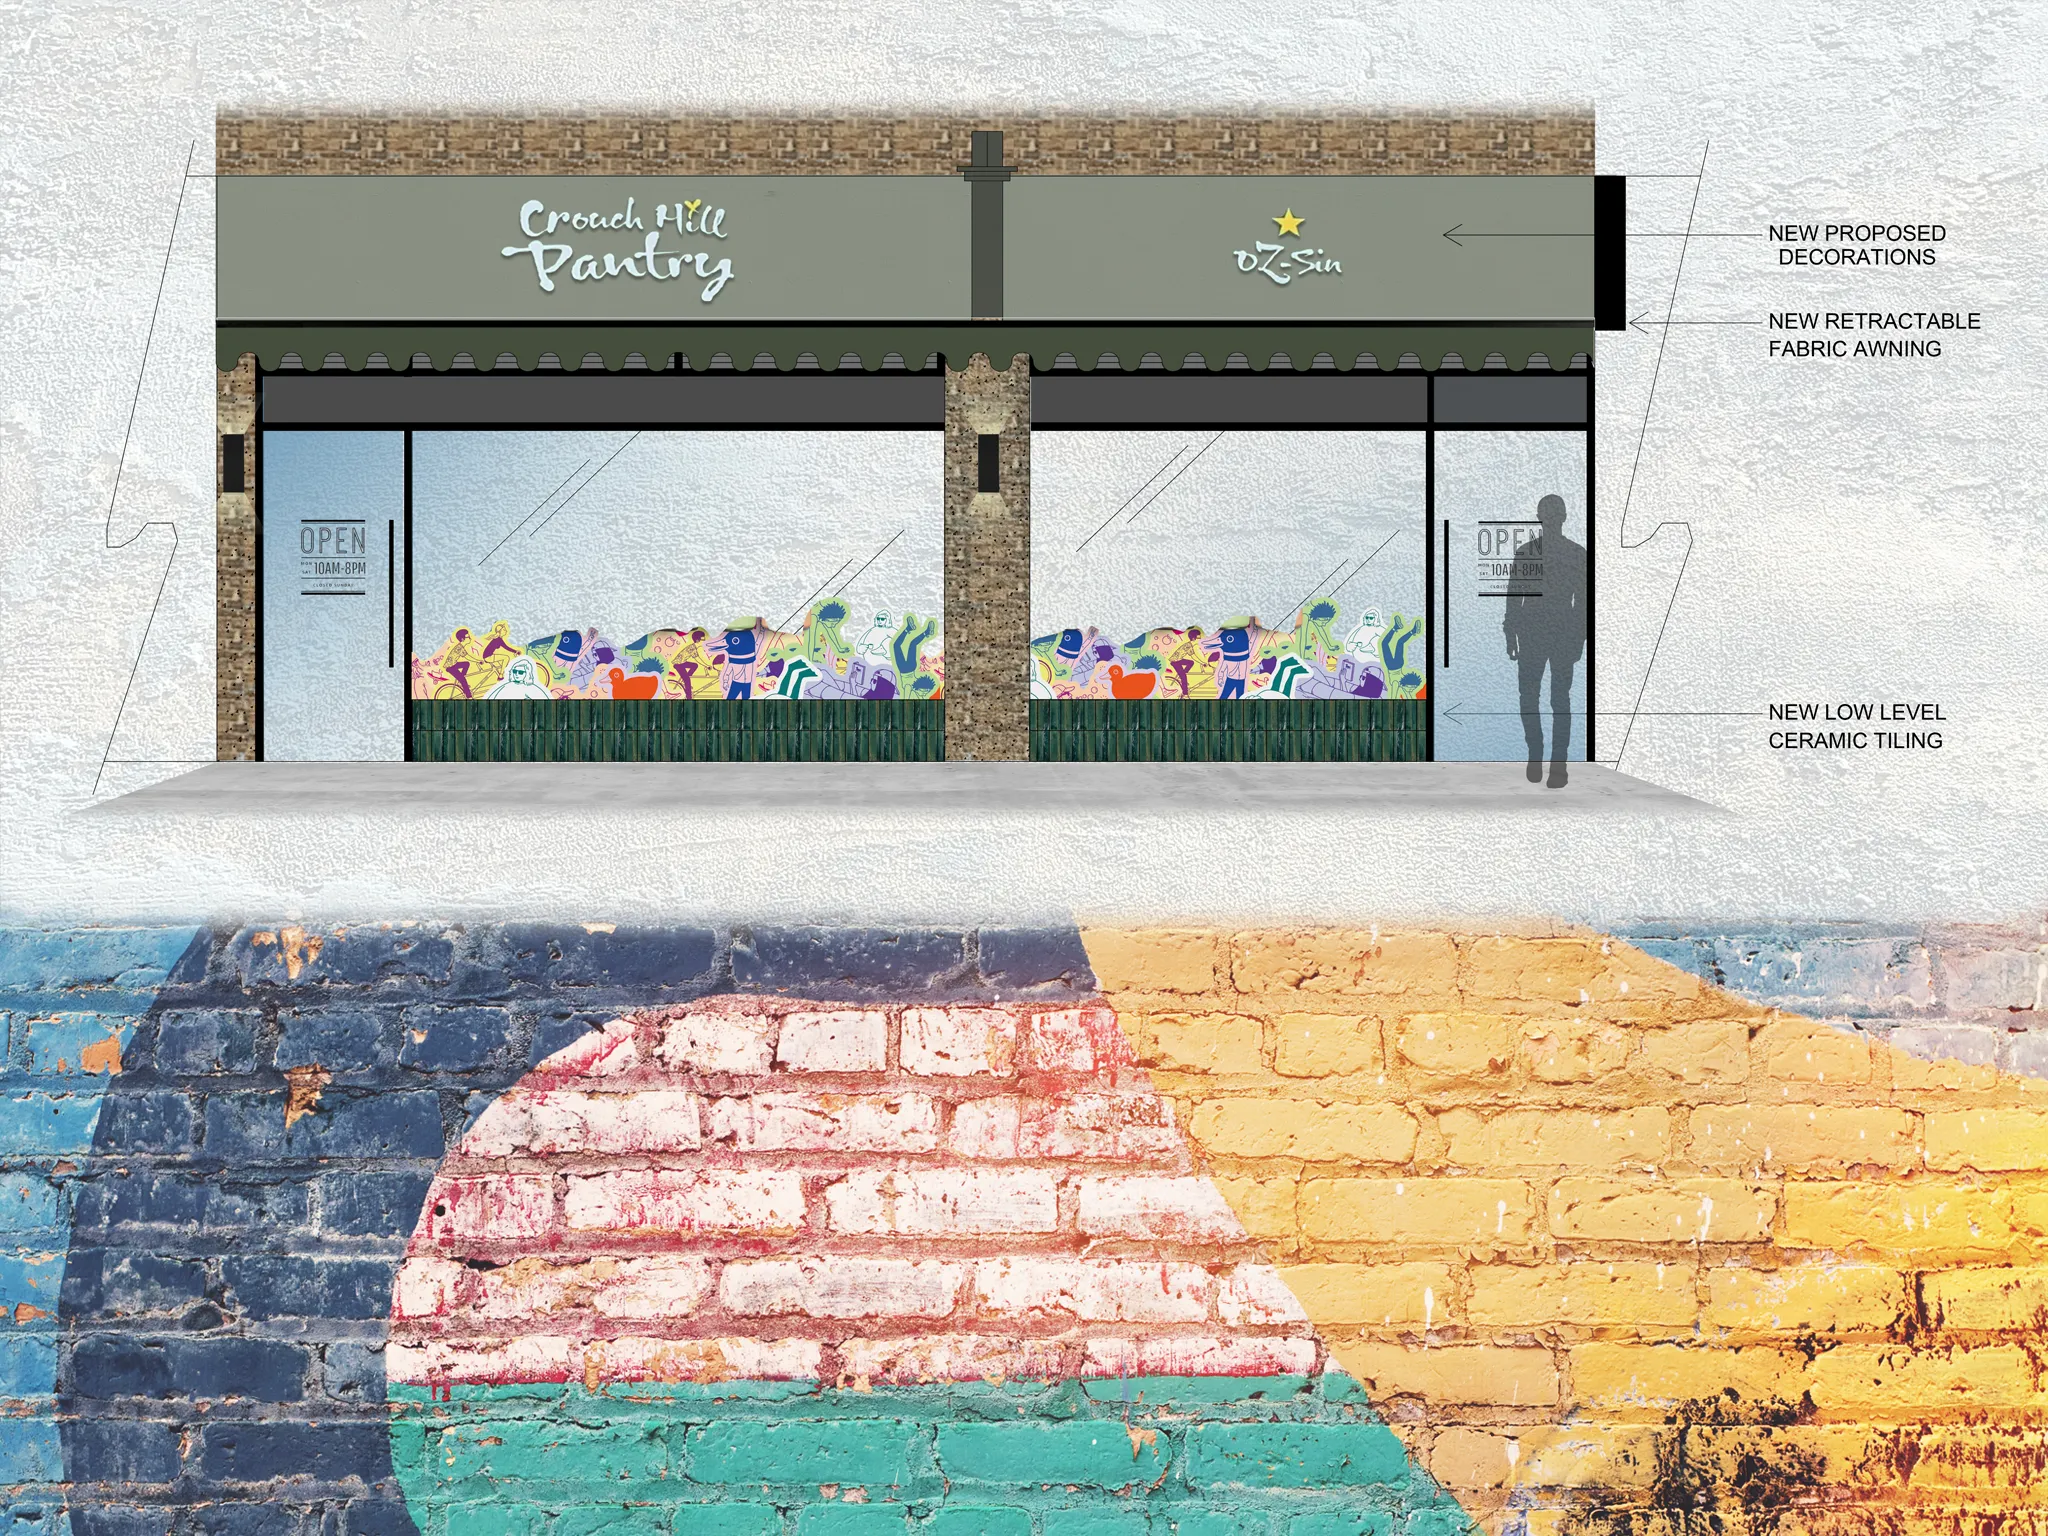 Crouch Hill Pantry Shopfront Elevation